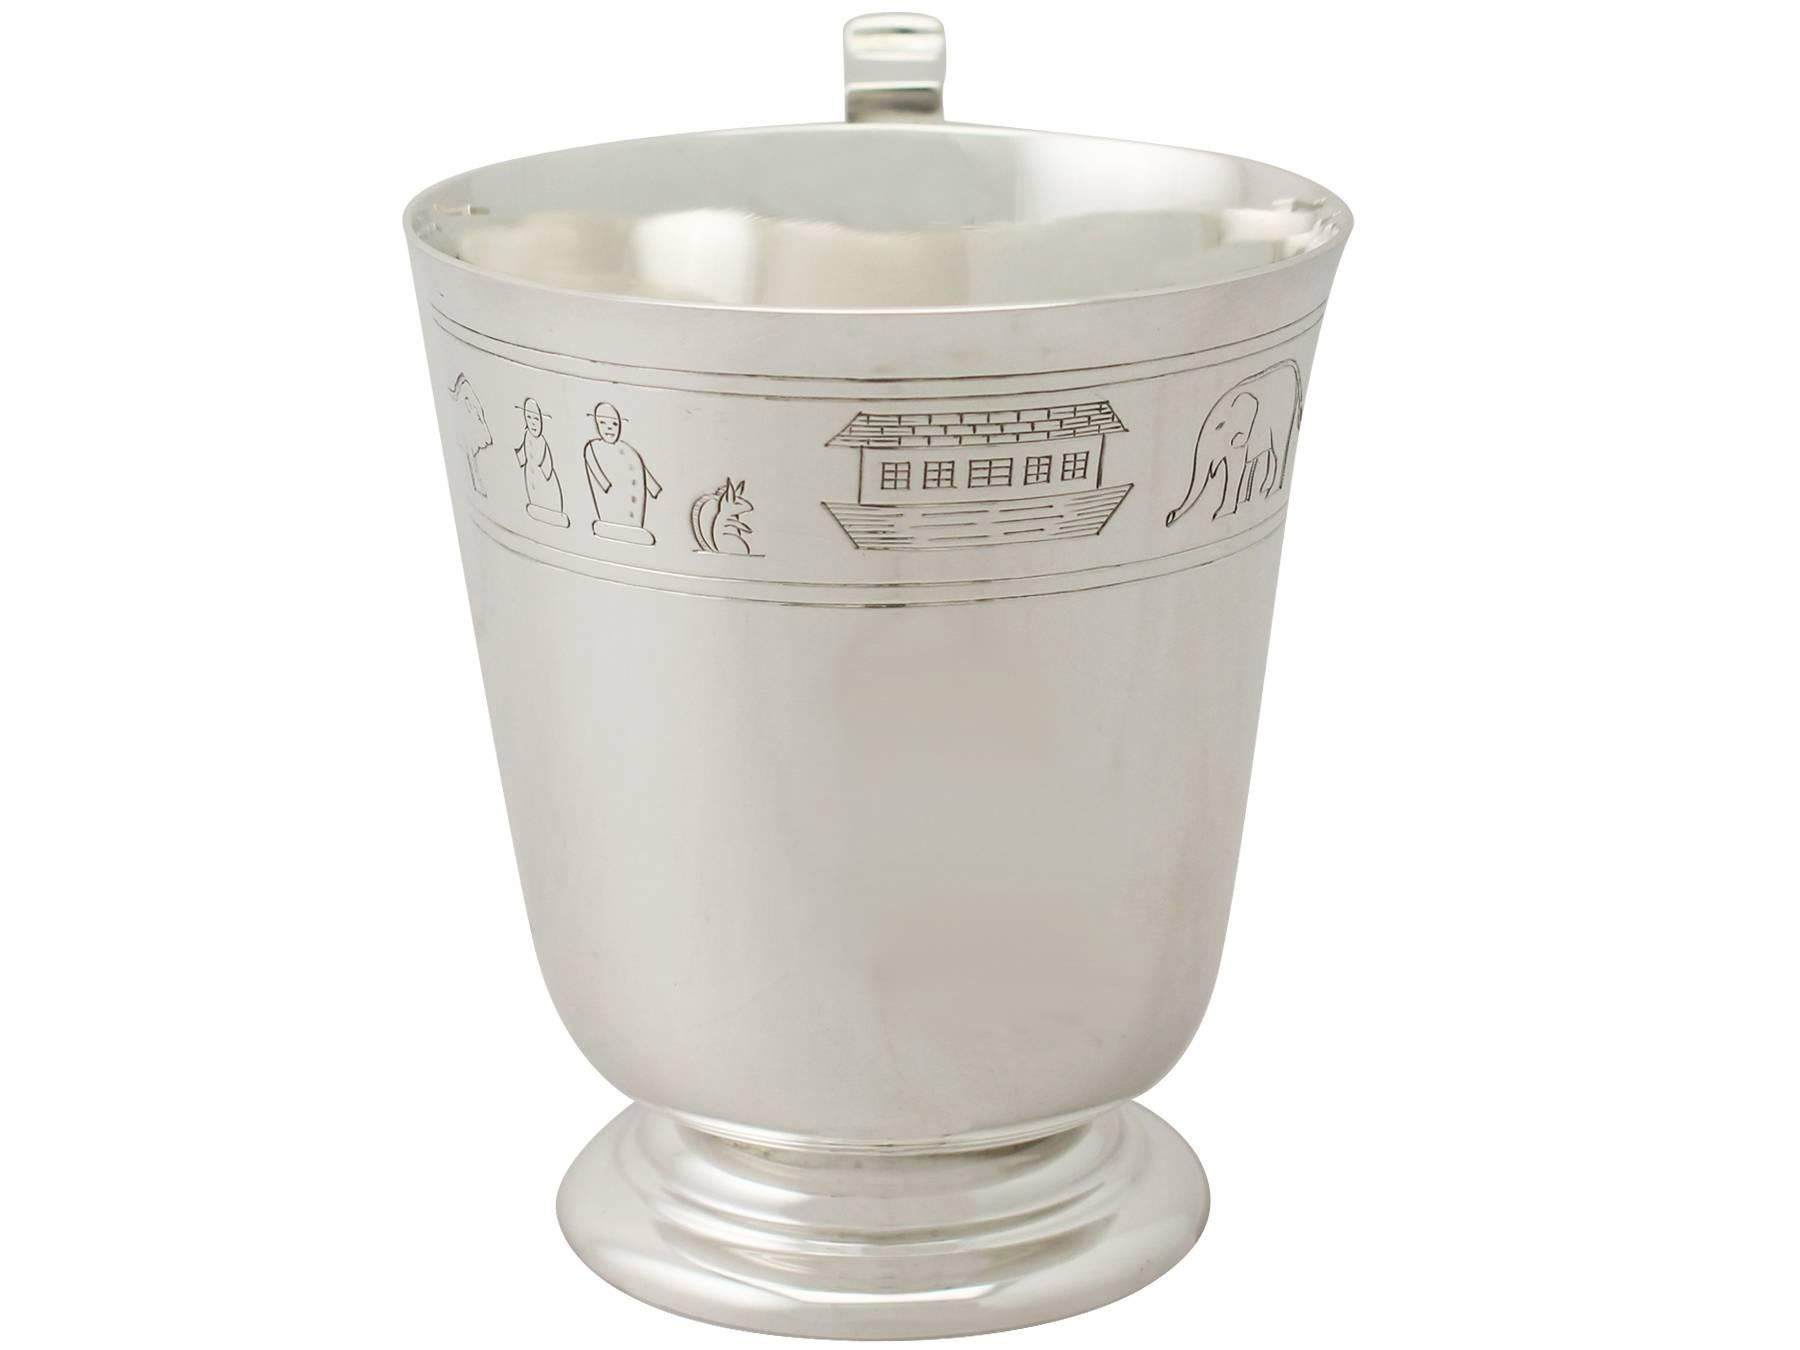 An exceptional, fine and impressive antique George V English sterling silver christening mug illustrating Noah's Ark and made in the Art Deco style; an addition to our religious silverware collection.

This exceptional antique George V sterling